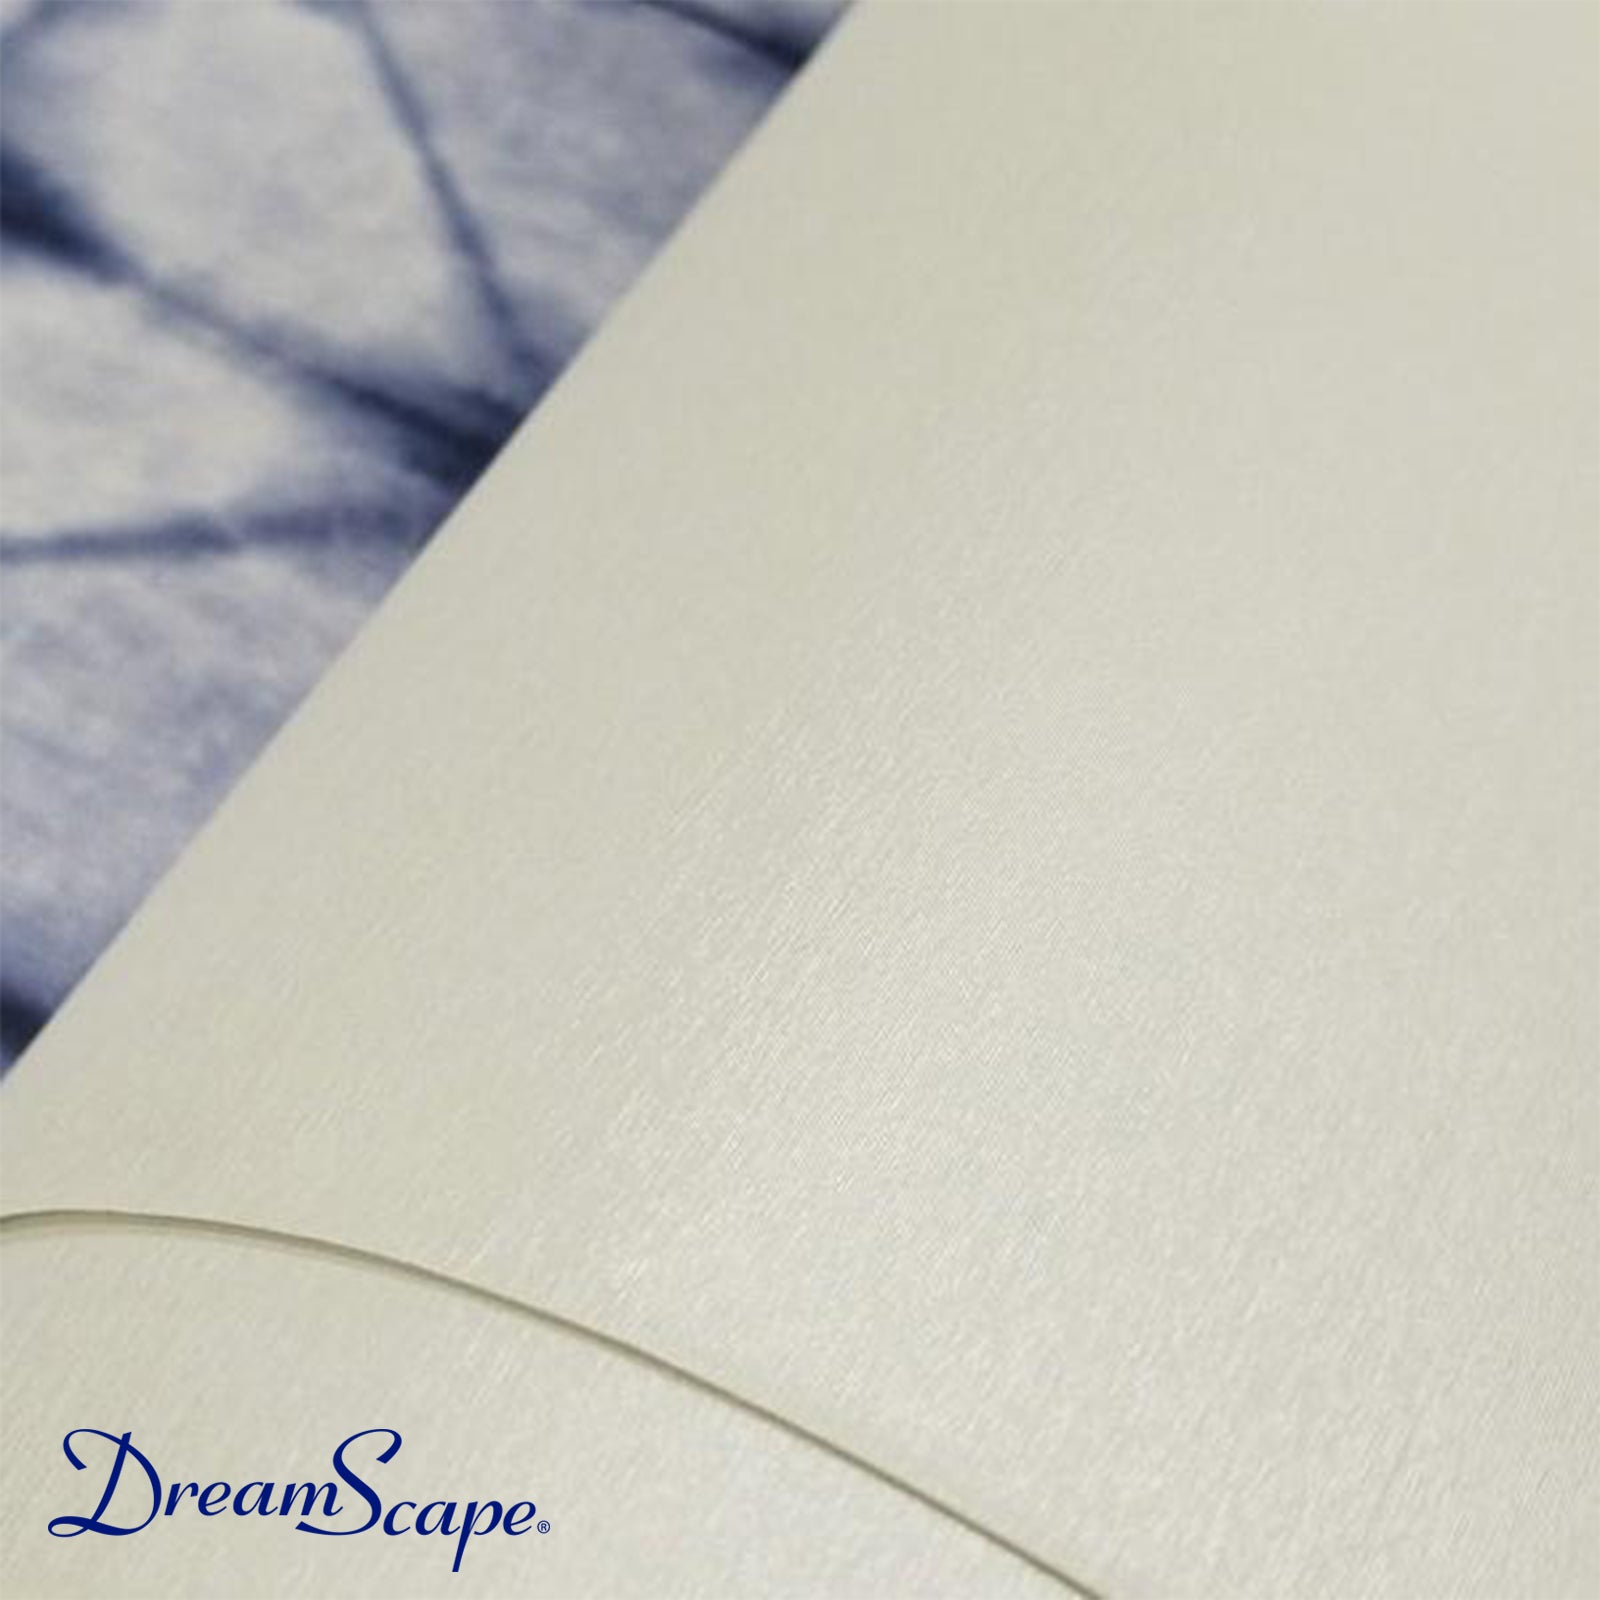 DreamScape, DreamScape Wallcovering Satara Special Effects - A Brushed Metal Look In Pearl Color